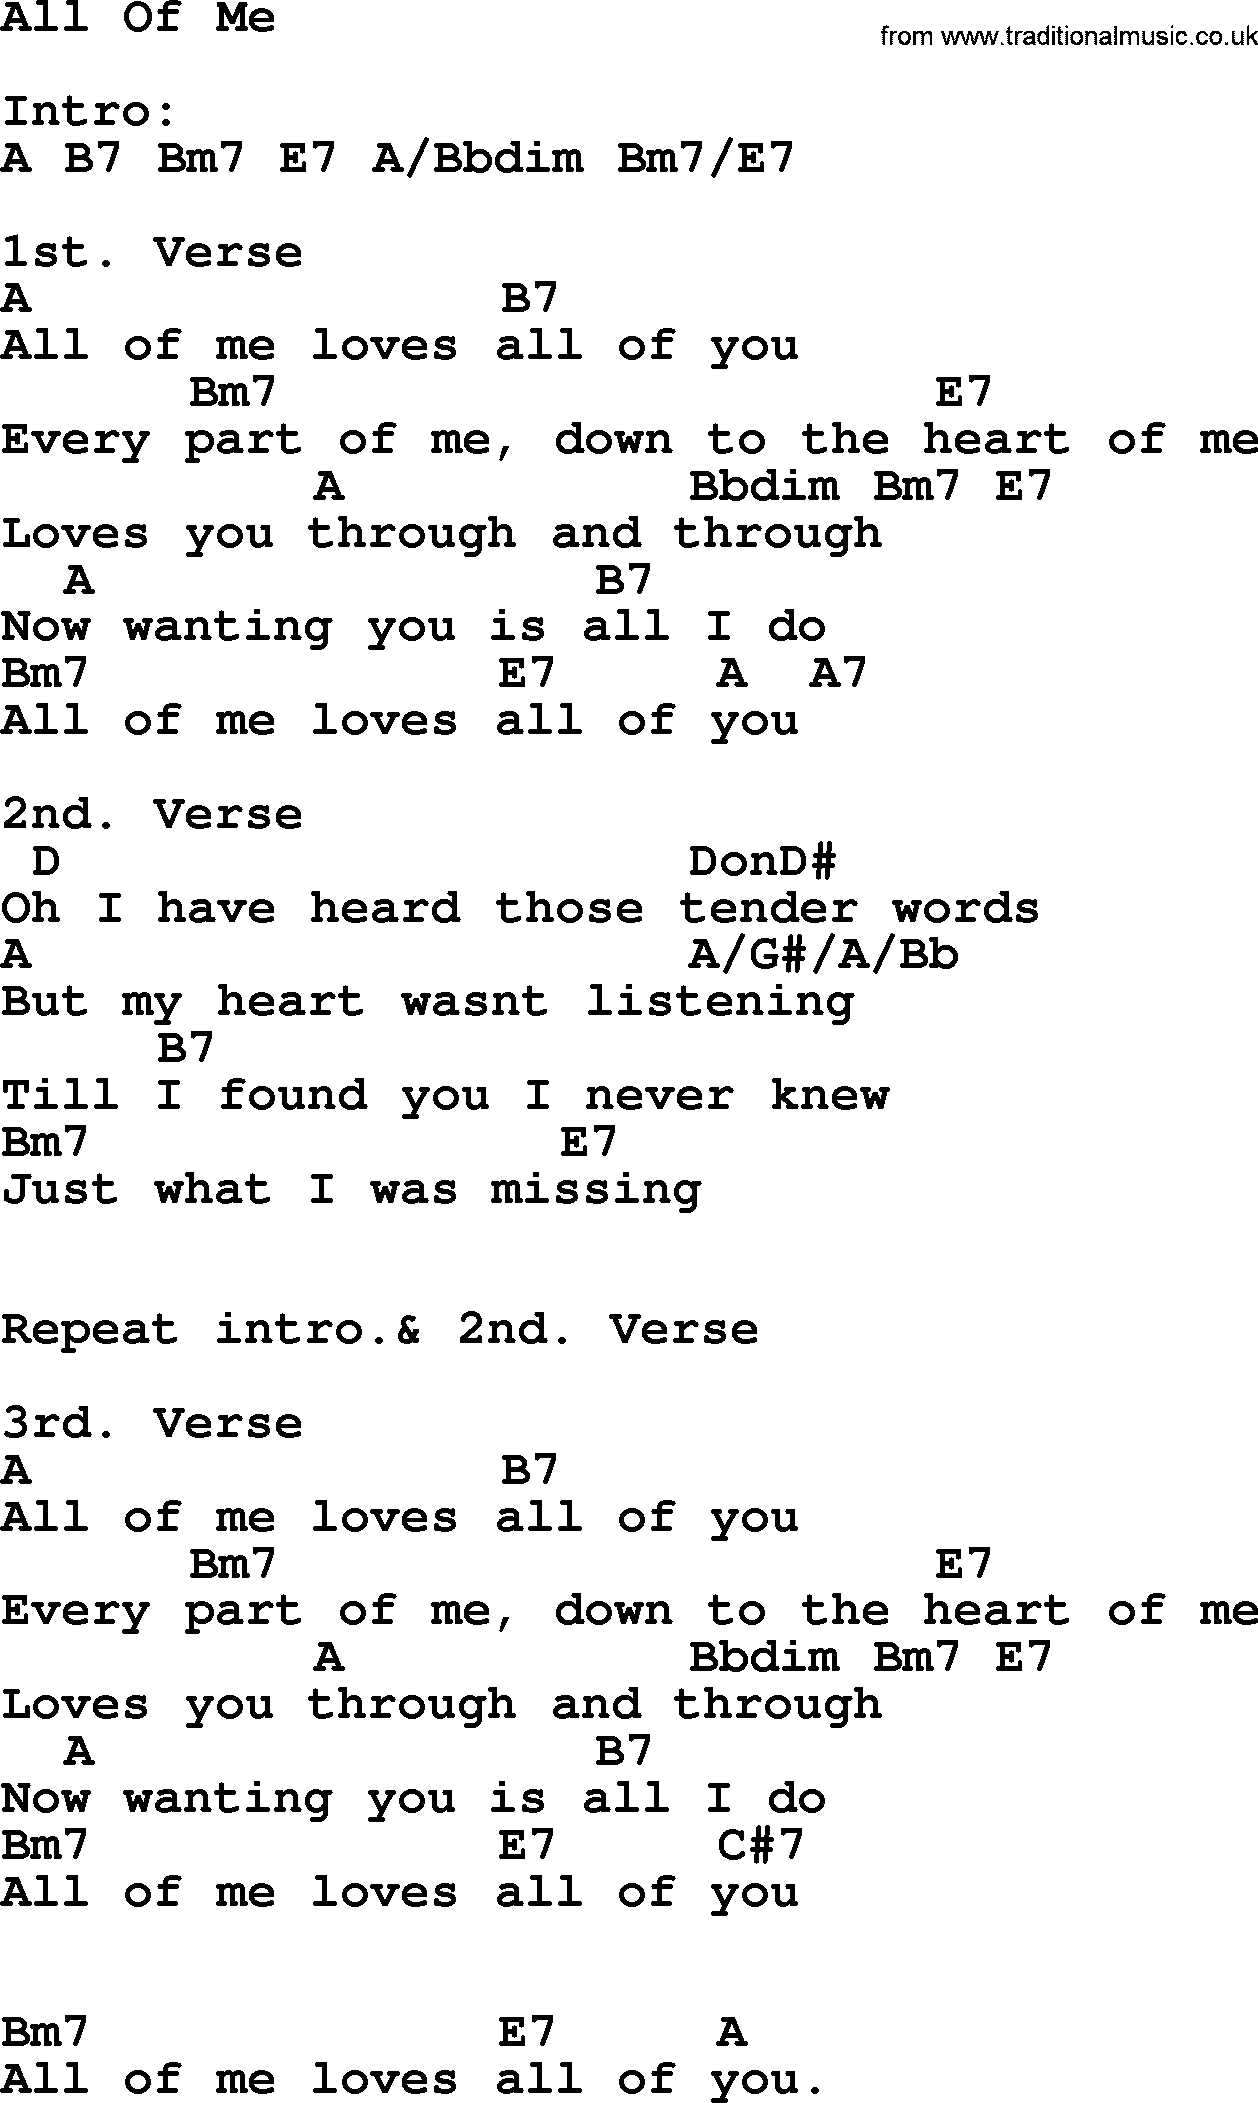 George Strait song: All Of Me, lyrics and chords